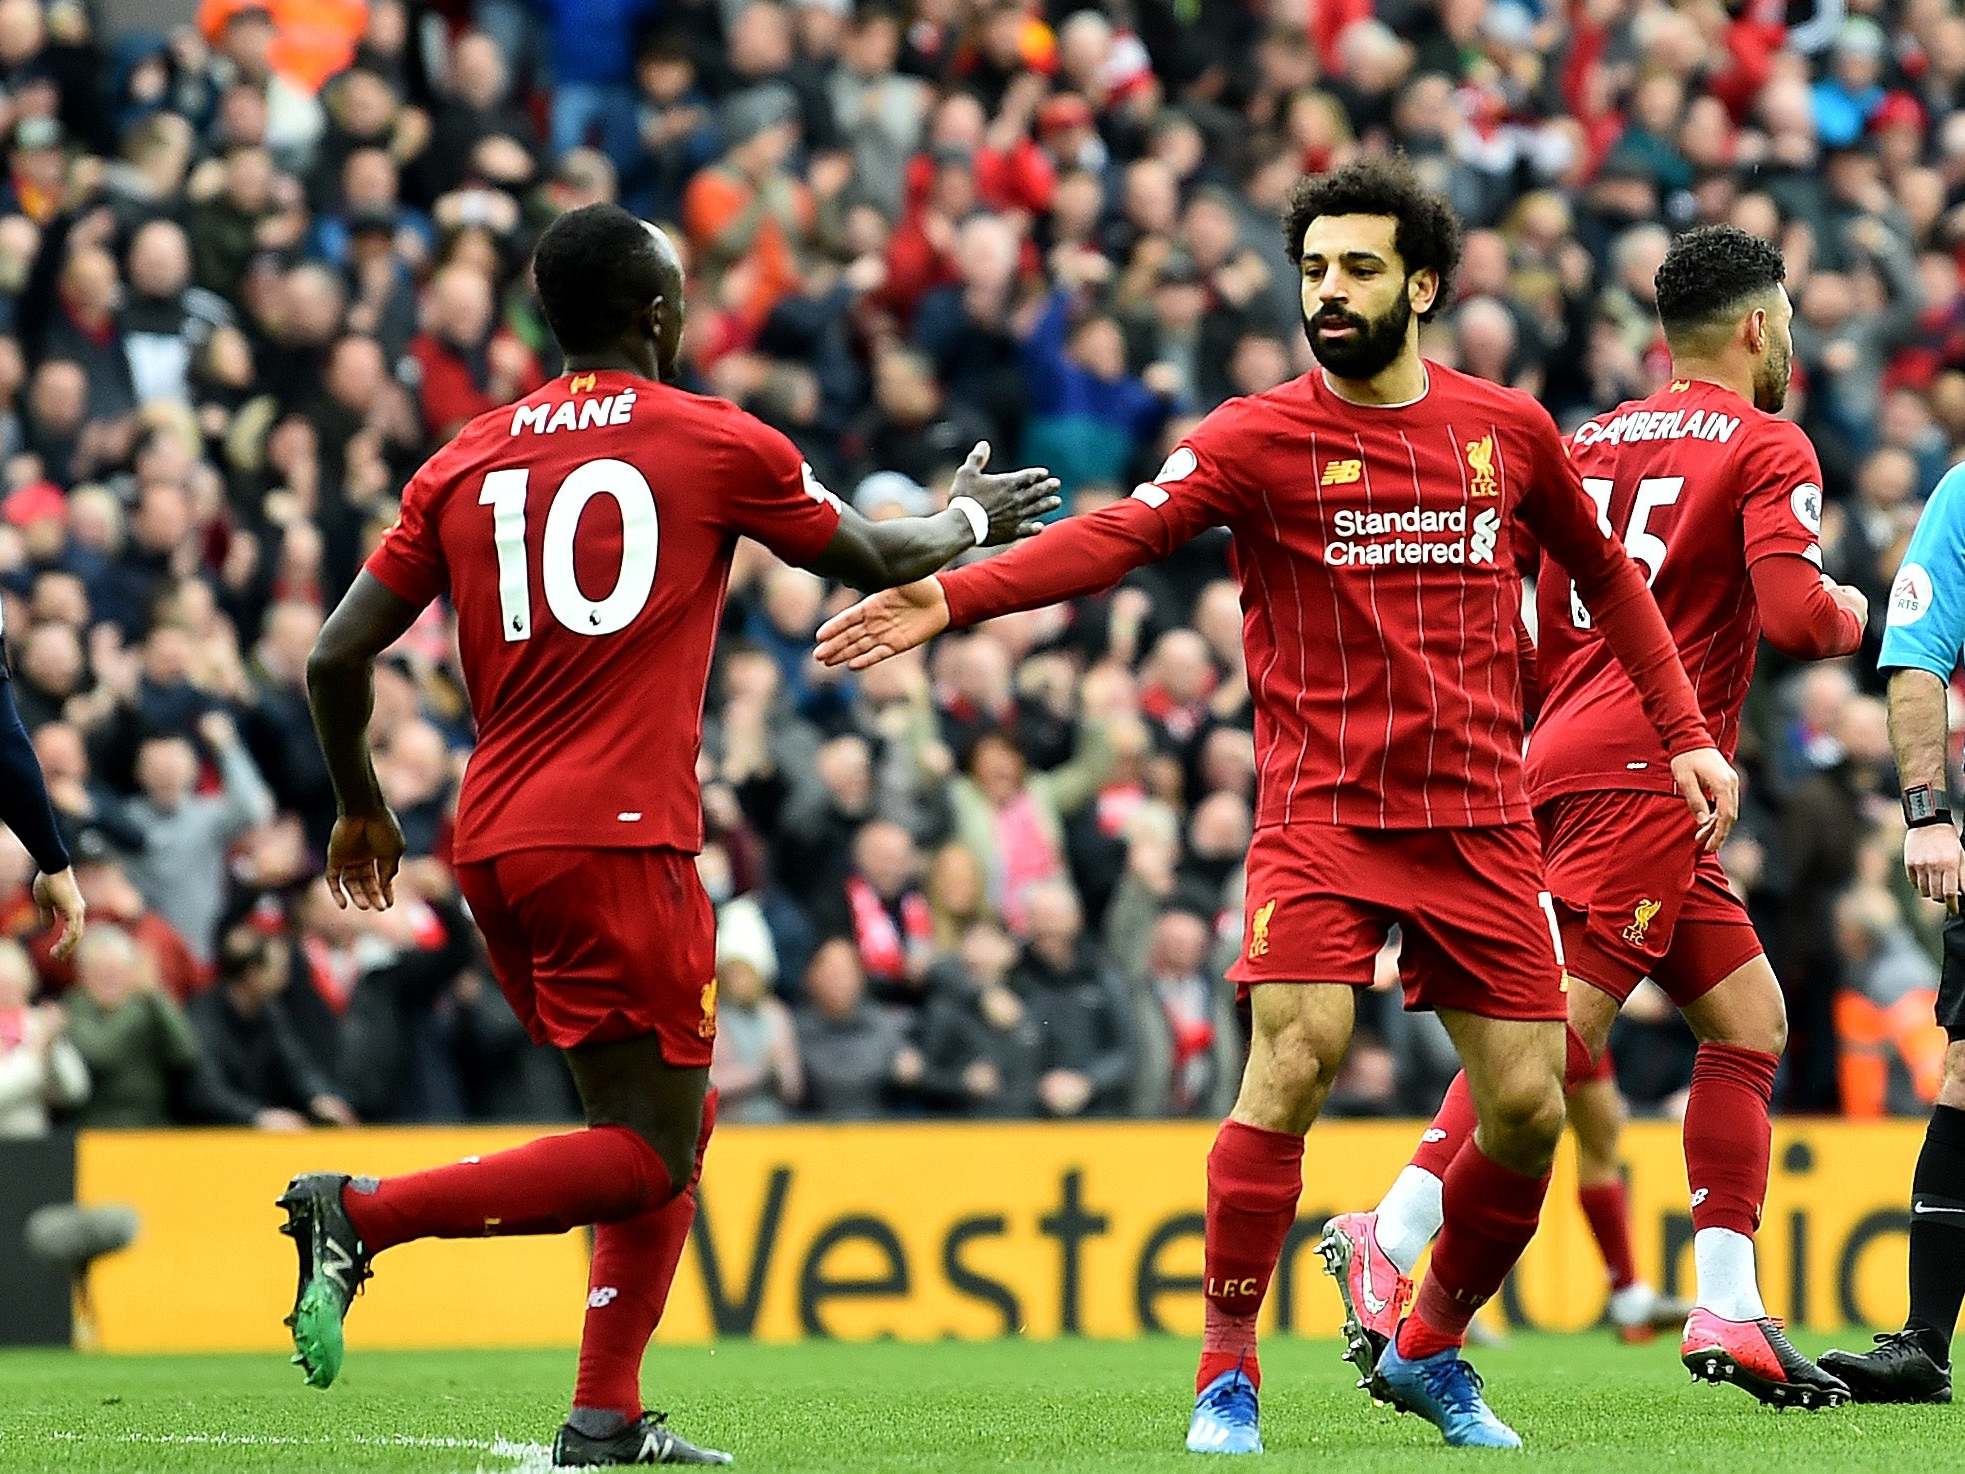 Mane and Salah celebrate as Liverpool go ahead against Bournemouth